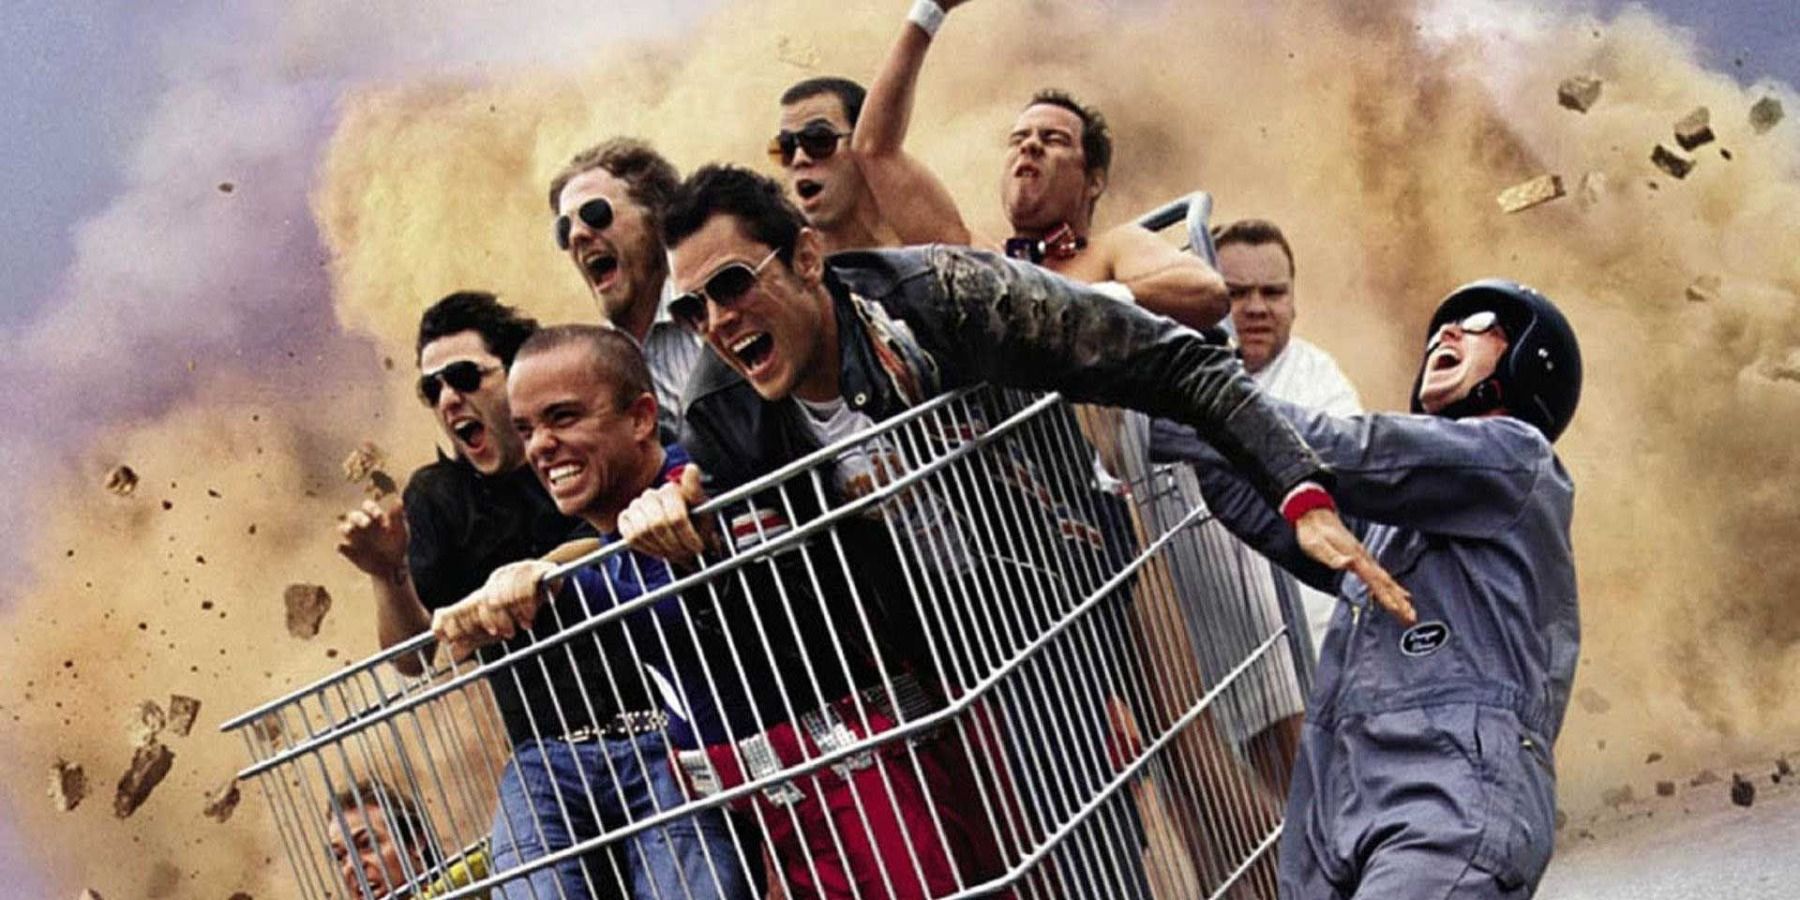 Jackass The Movie shopping cart poster